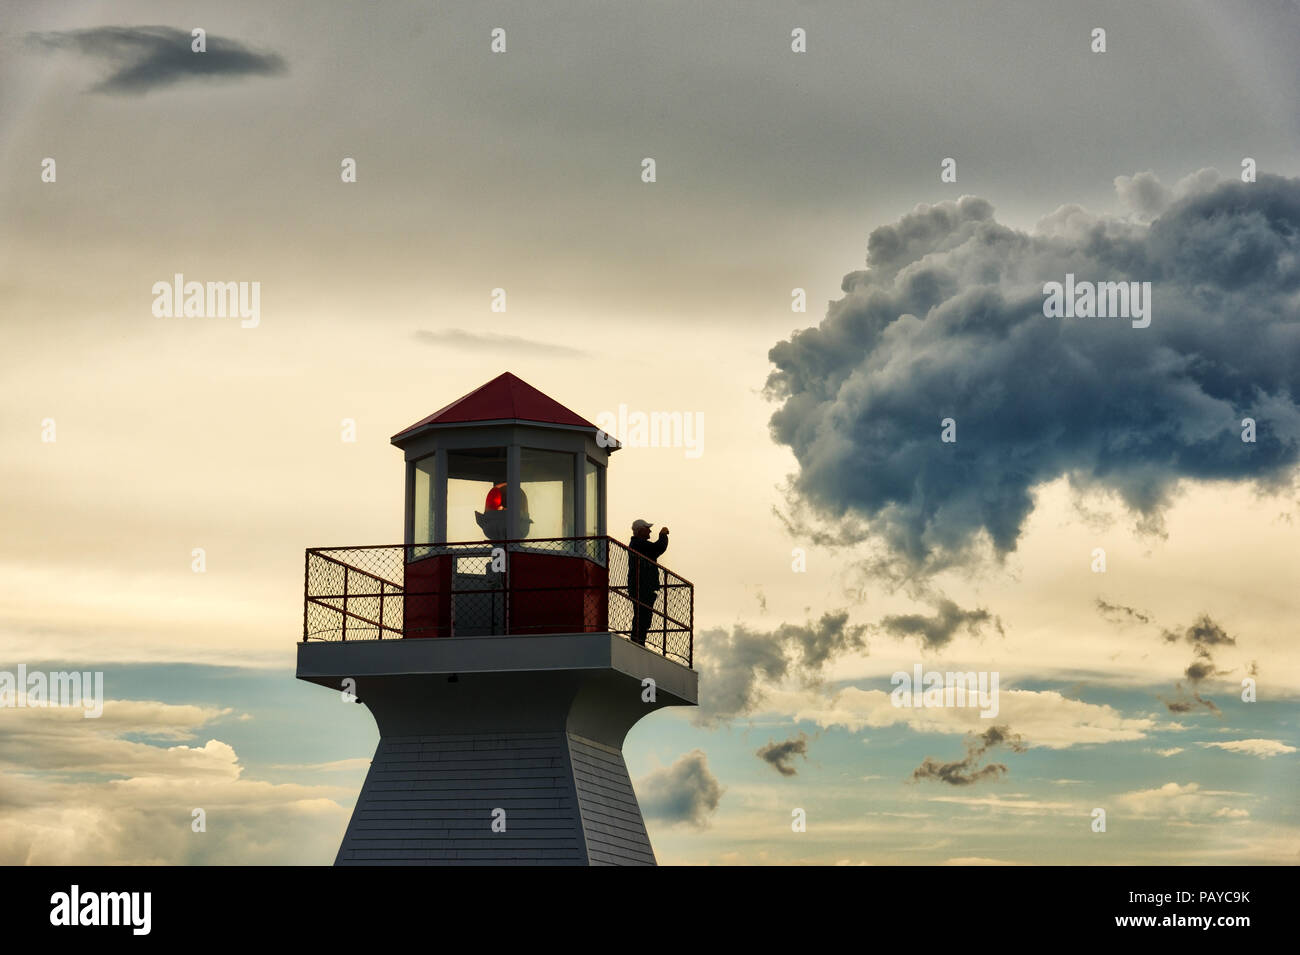 A man stood taking photos on the lighthouse at sunset in Carleton in Gaspesie, Quebec Canada Stock Photo